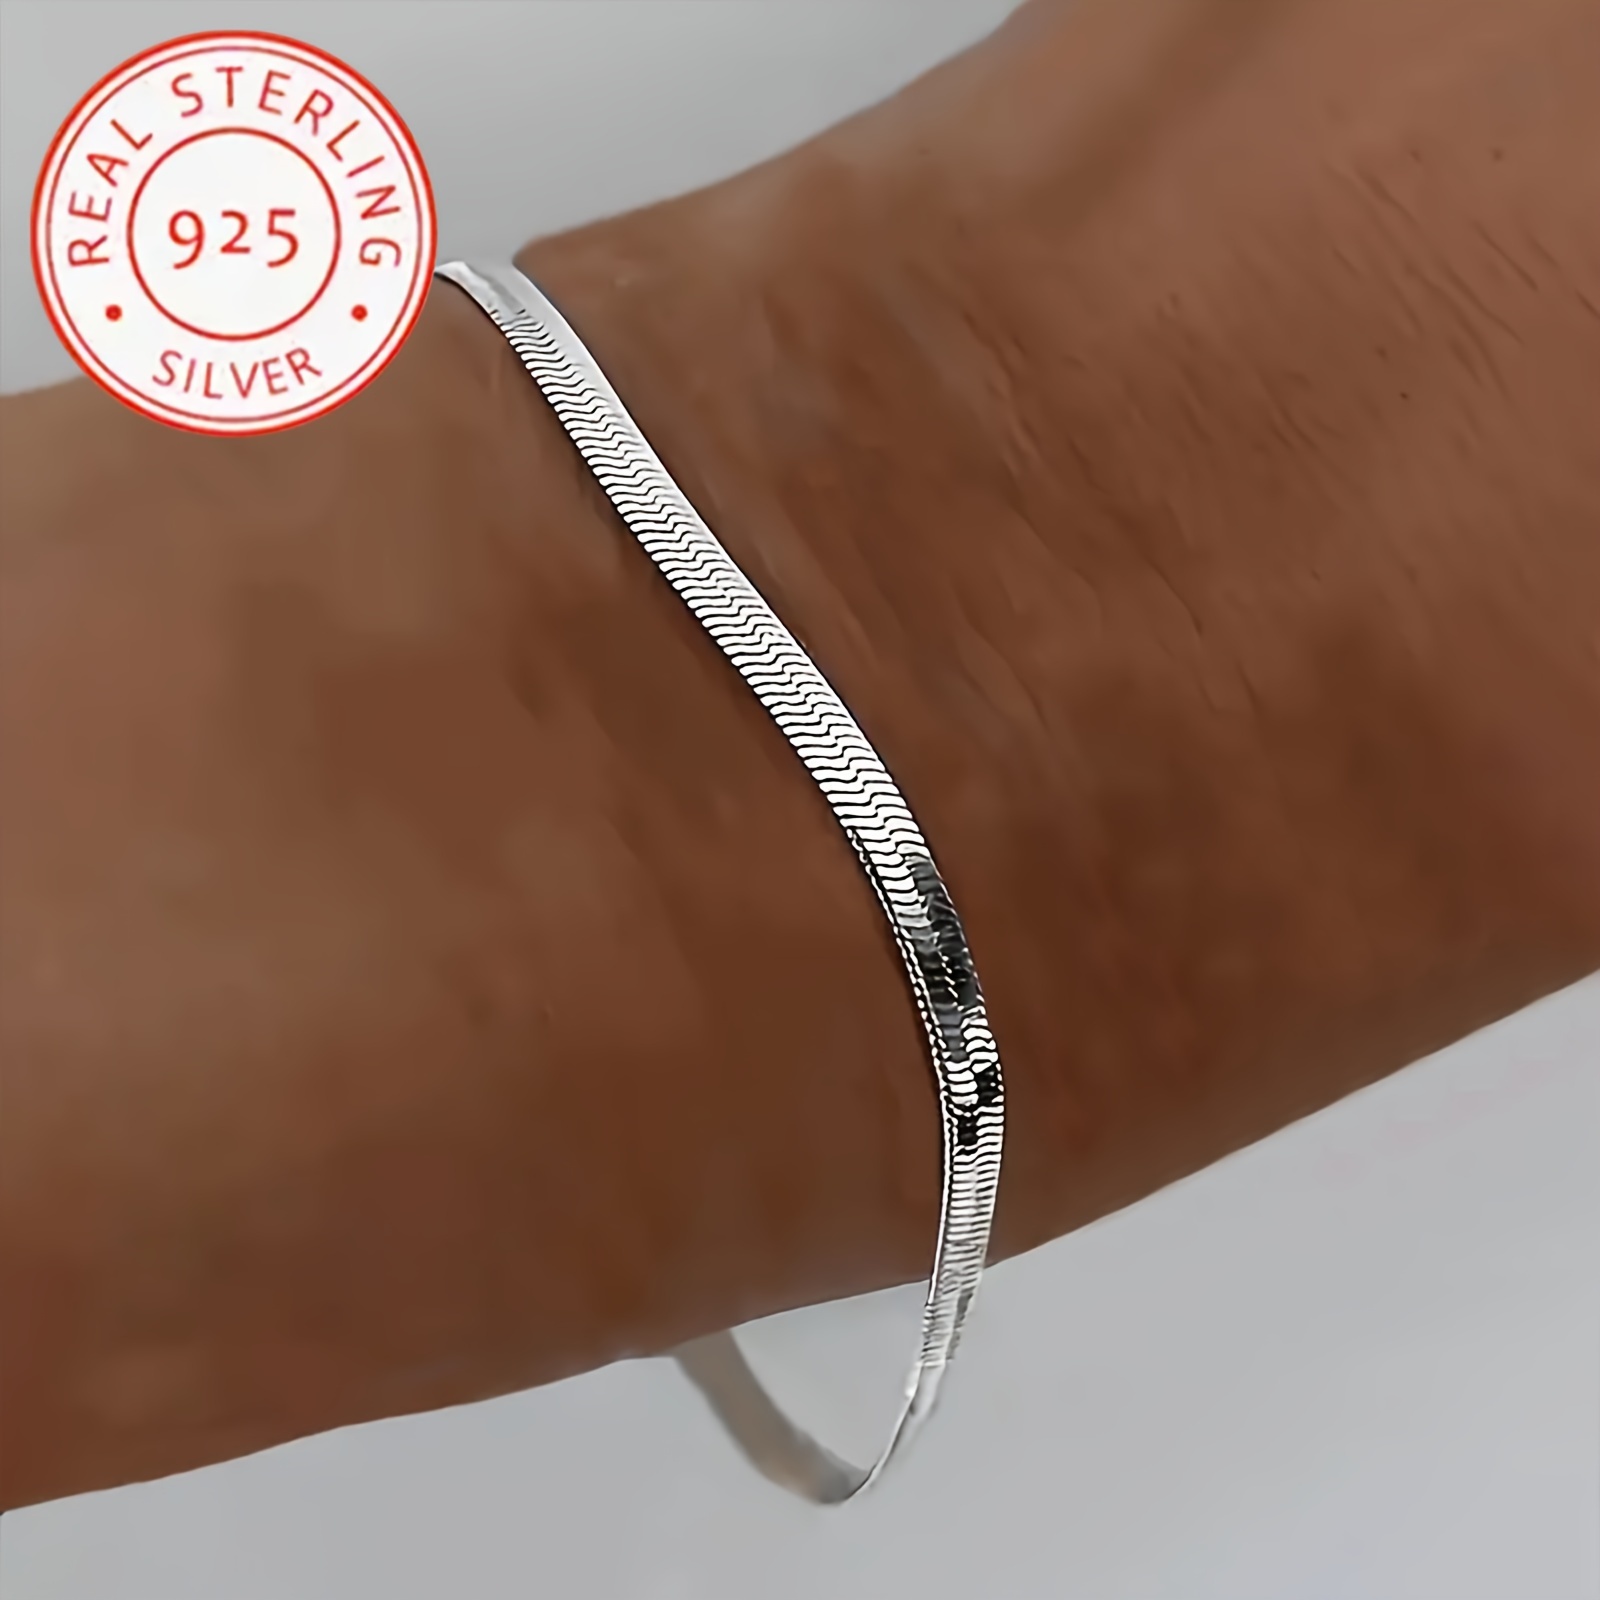 

925 Sterling Silver Snake Bone Chain Bracelet - Elegant Handcrafted Jewelry, Memorable Style, Durable & Unique Silver Design, 3.2g Weight, Chic Summer Essential